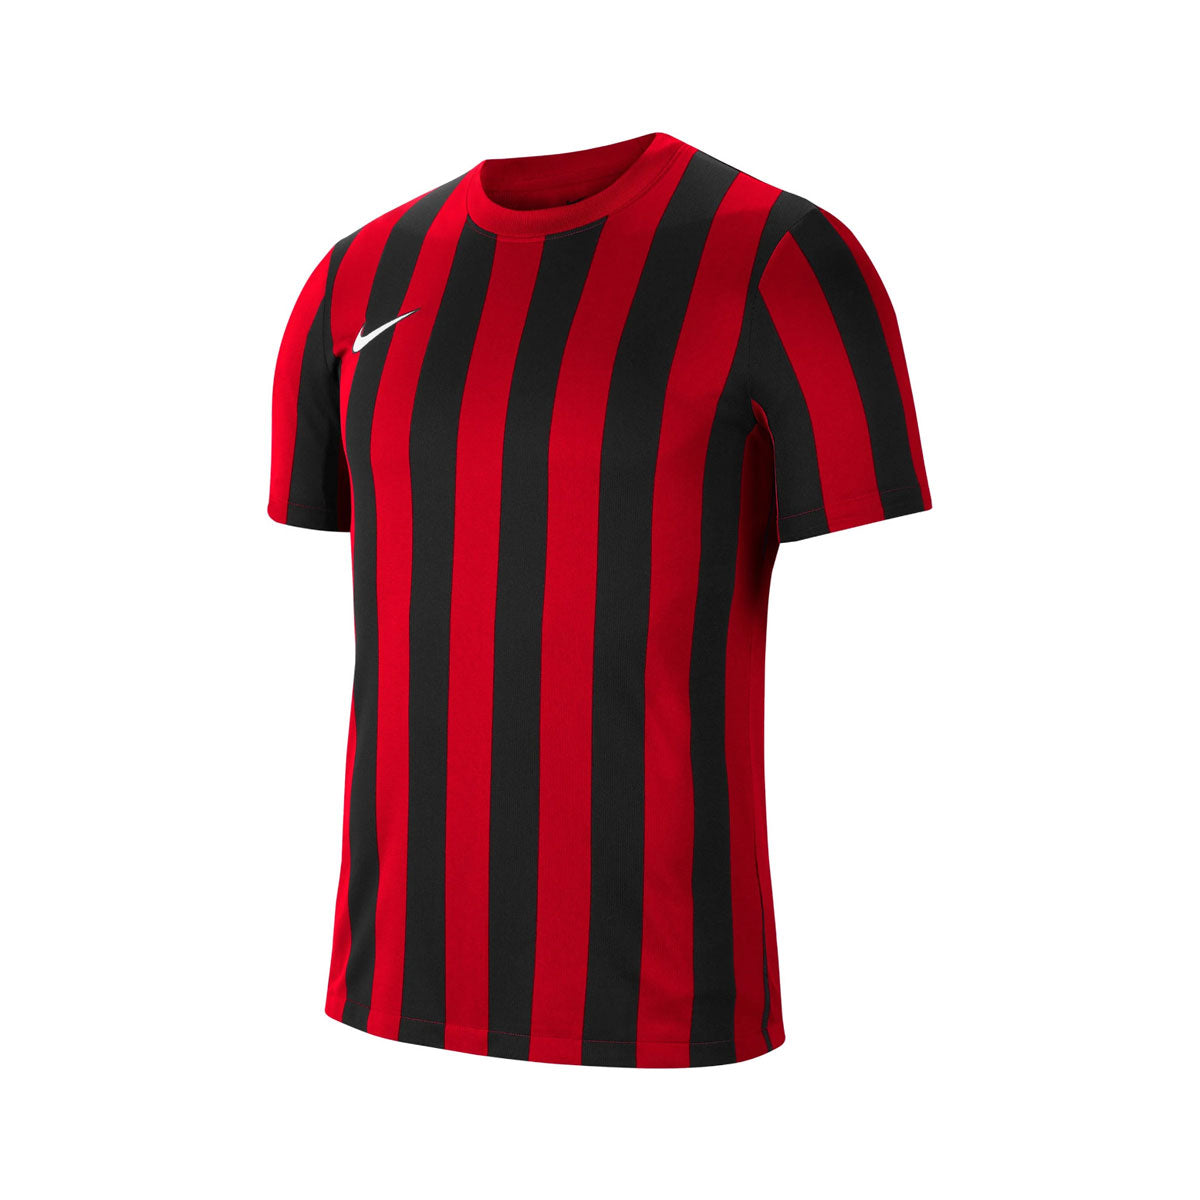 Nike Kids Striped Division 4 Youth